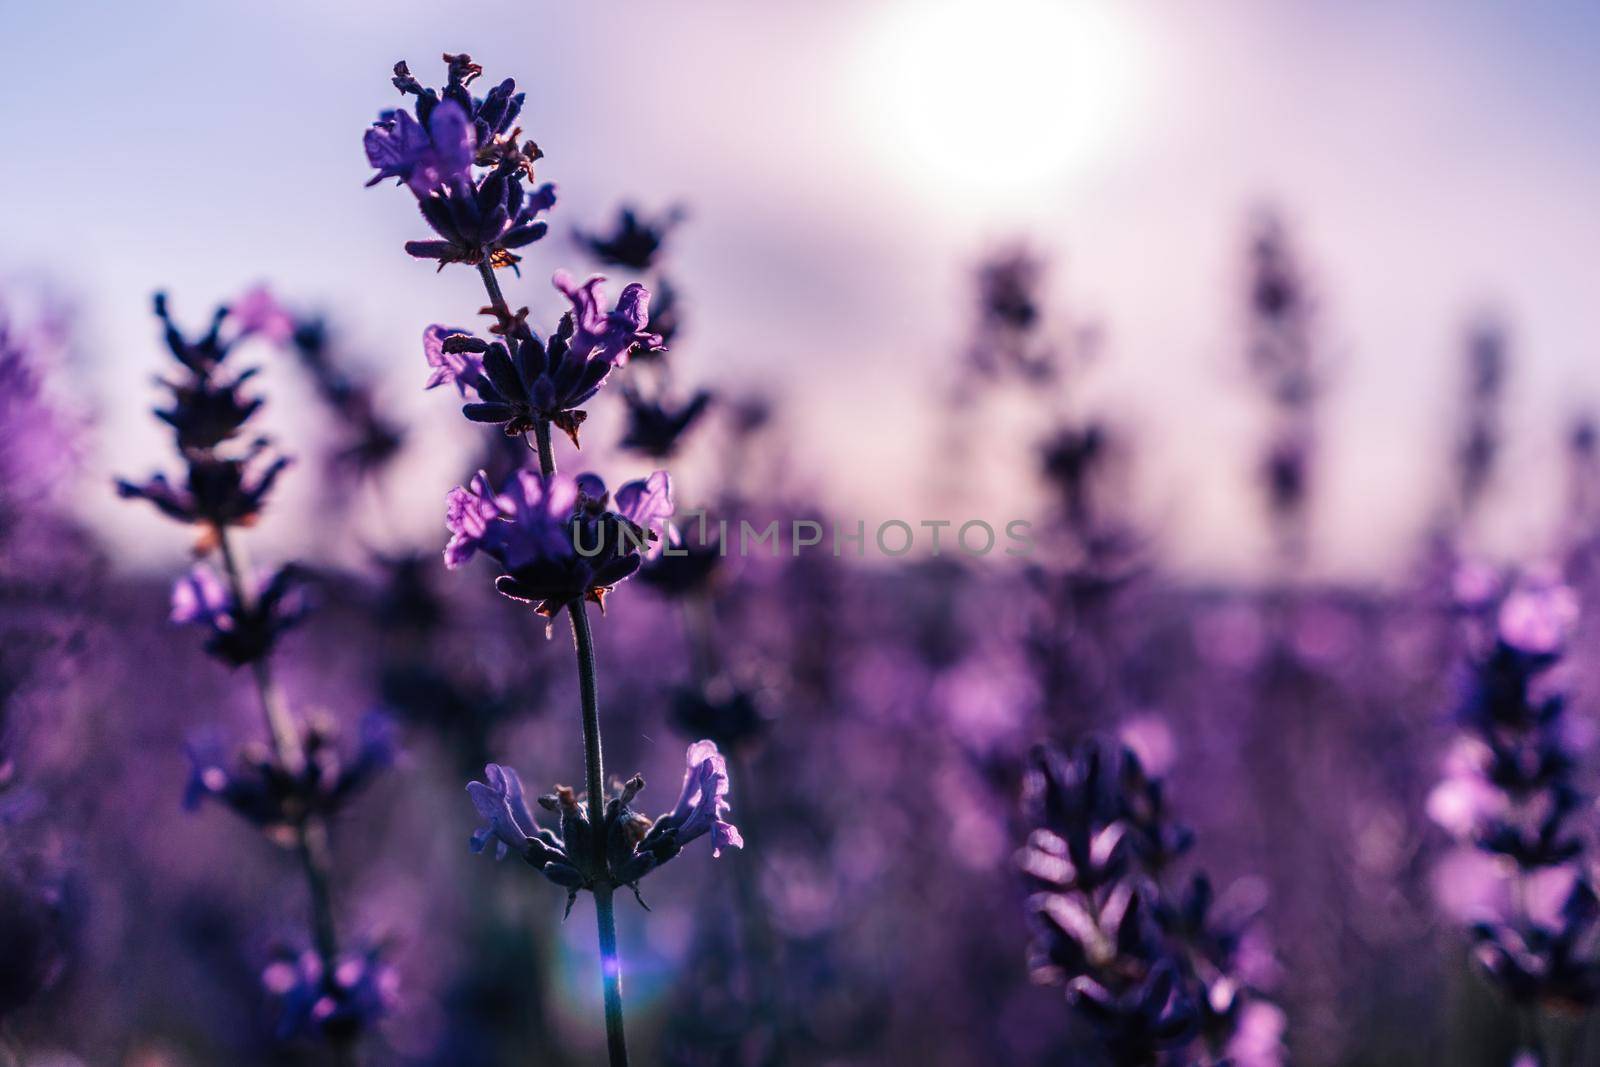 Close up Lavender flower blooming scented fields in endless rows on sunset. Selective focus on Bushes of lavender purple aromatic flowers at lavender fields